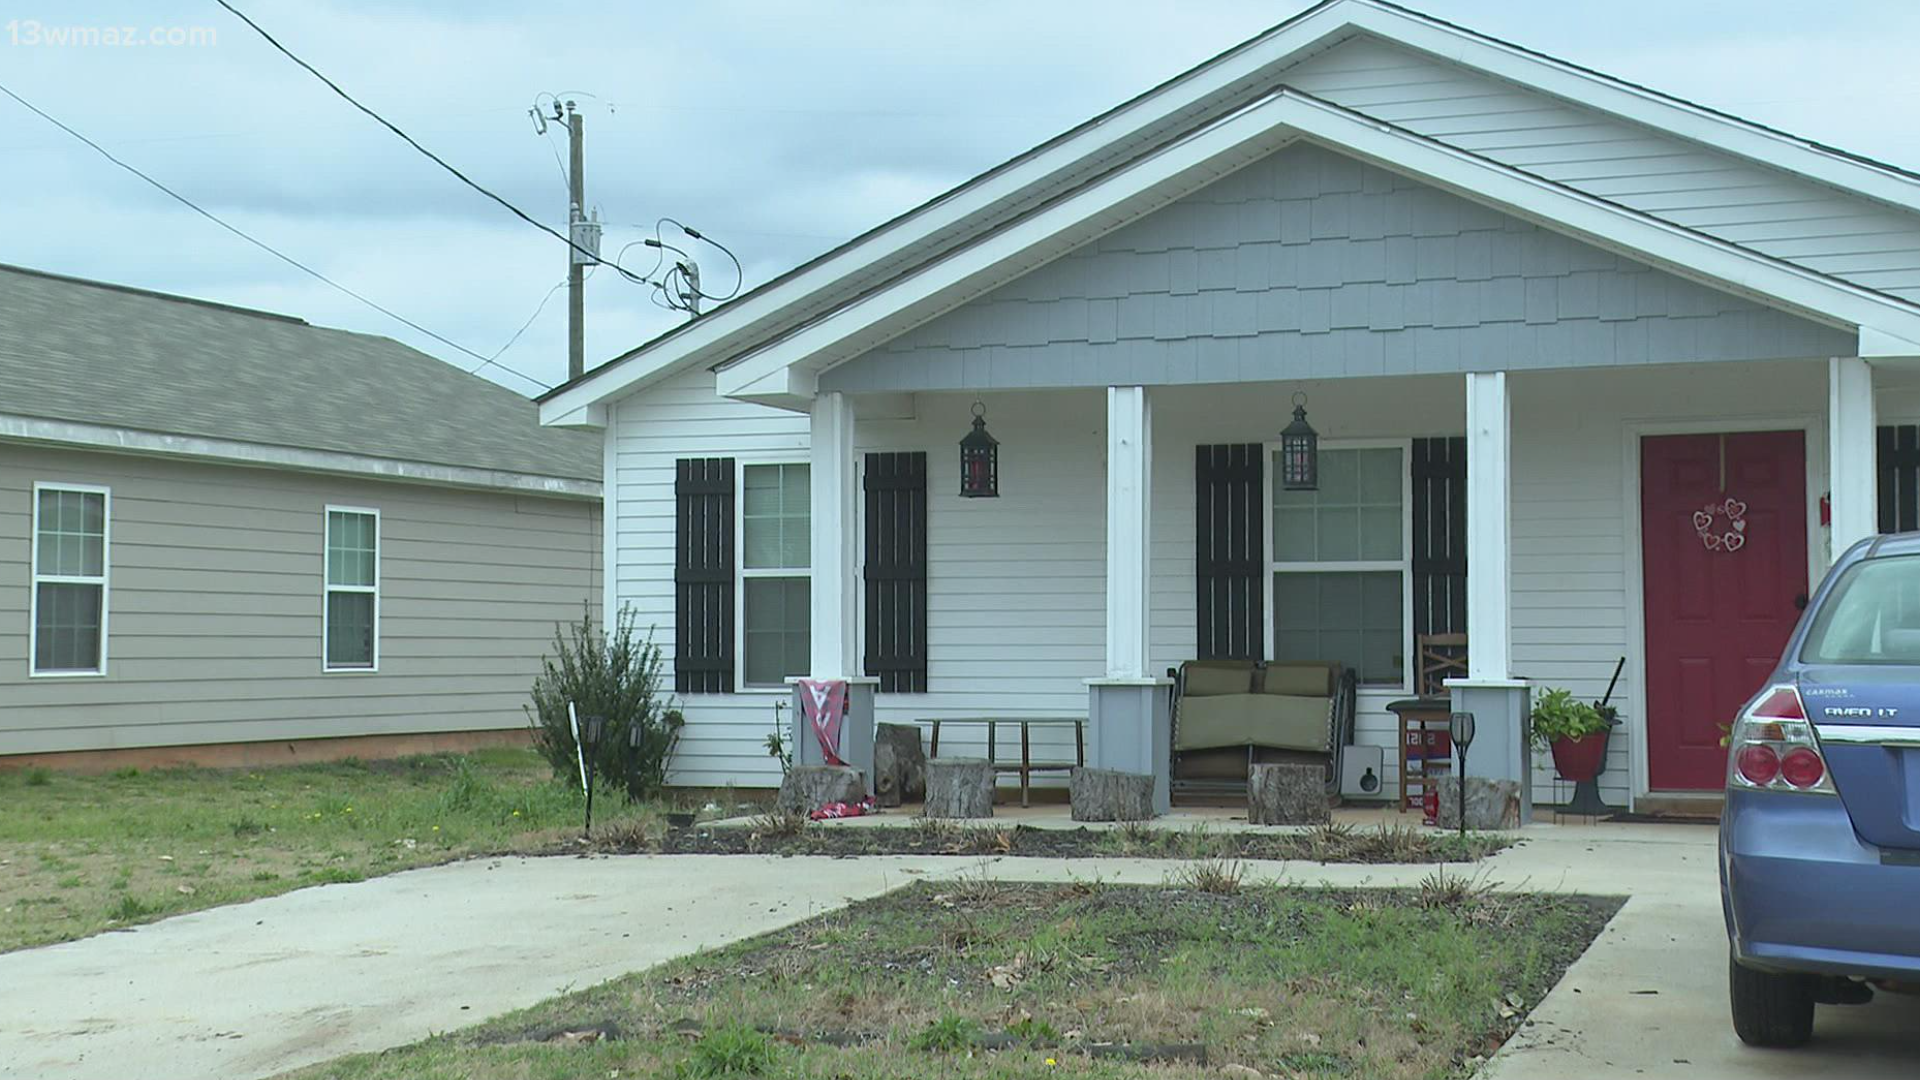 Habitat for Humanity bought three lots from the City of Warner Robins to bring new housing to low-income families in town.